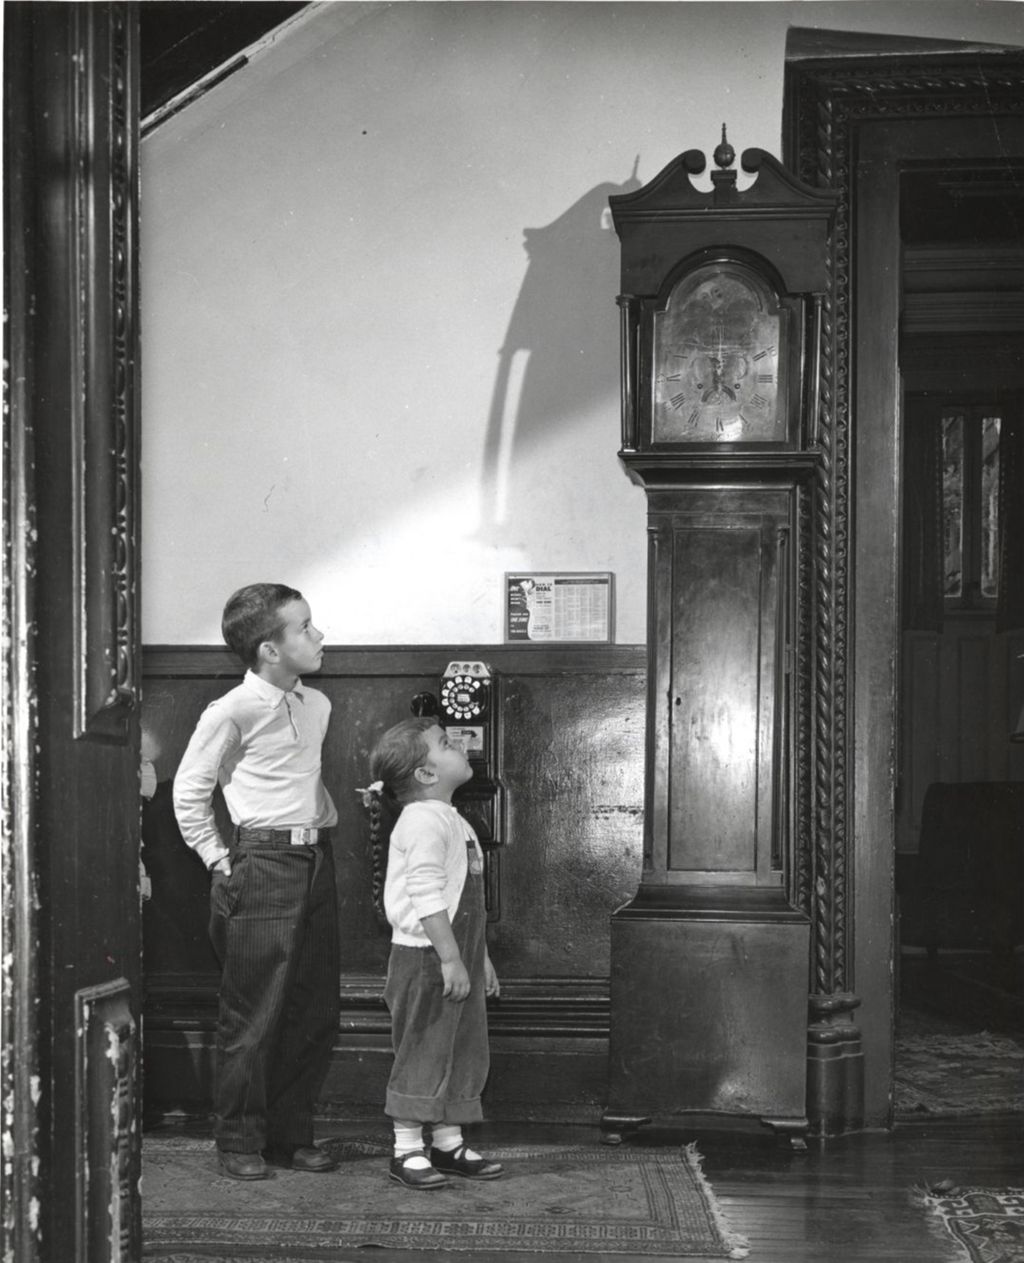 Boy and girl looking up at grandfather clock